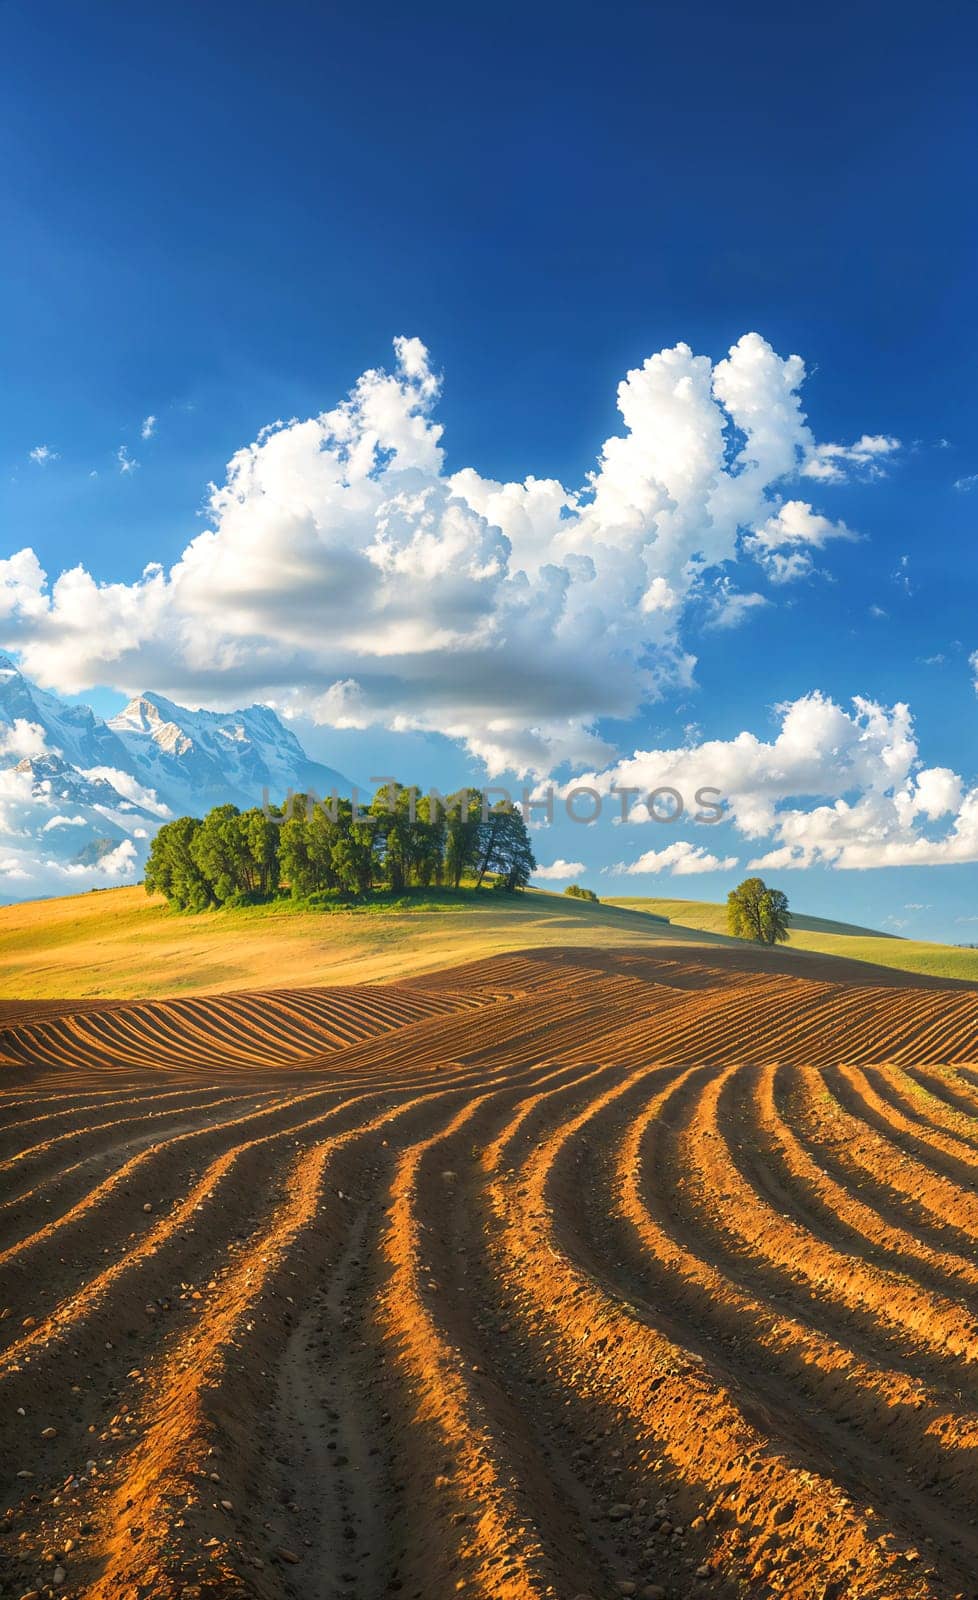 A keyline-plowed field under a blue sky dotted with fluffy white clouds